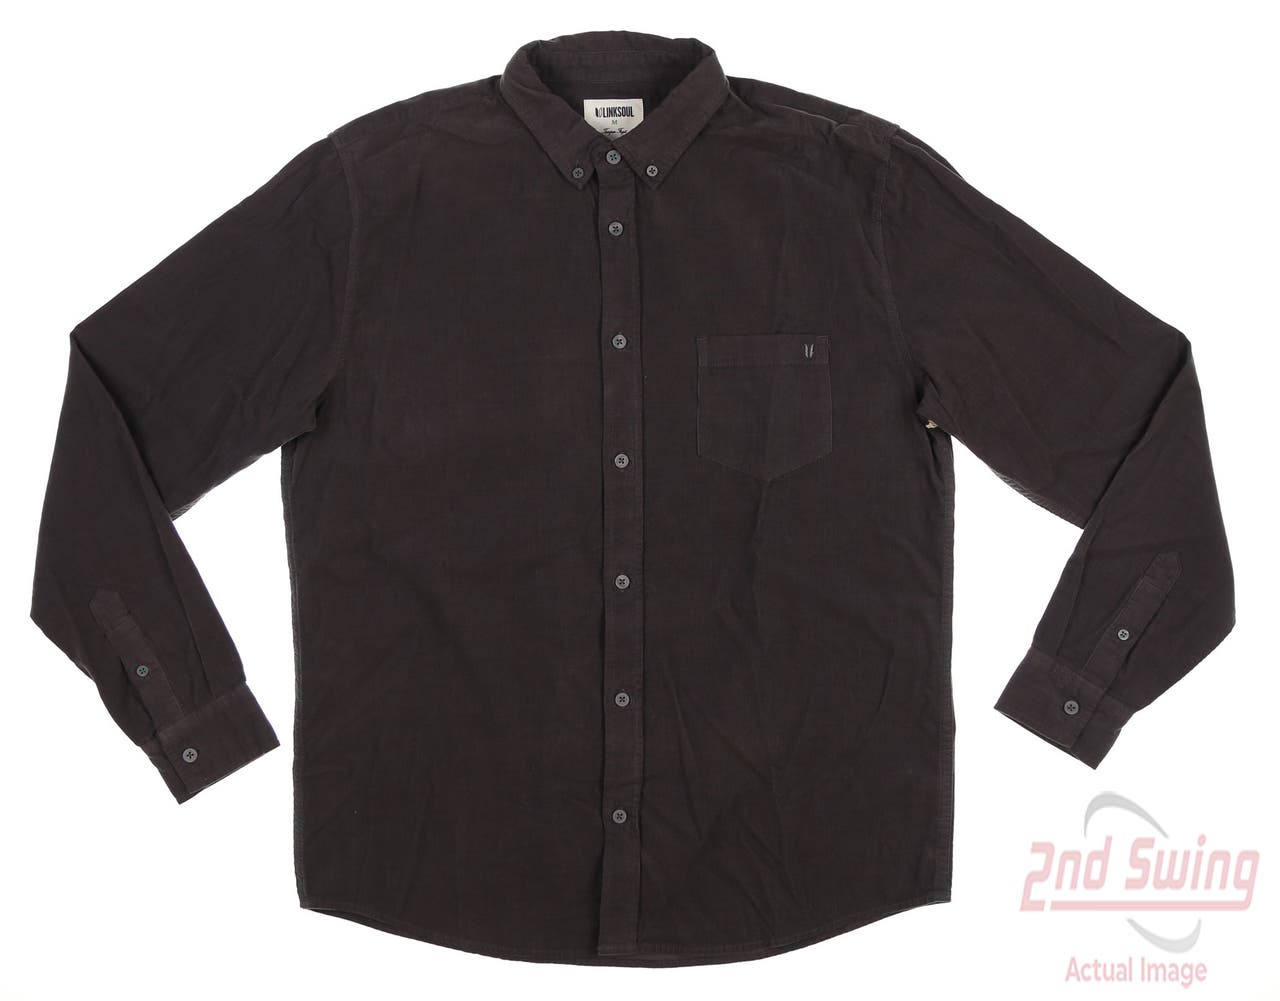 New Mens LinkSoul Pinwale Corduroy Button Up Medium M Charcoal MSRP $98